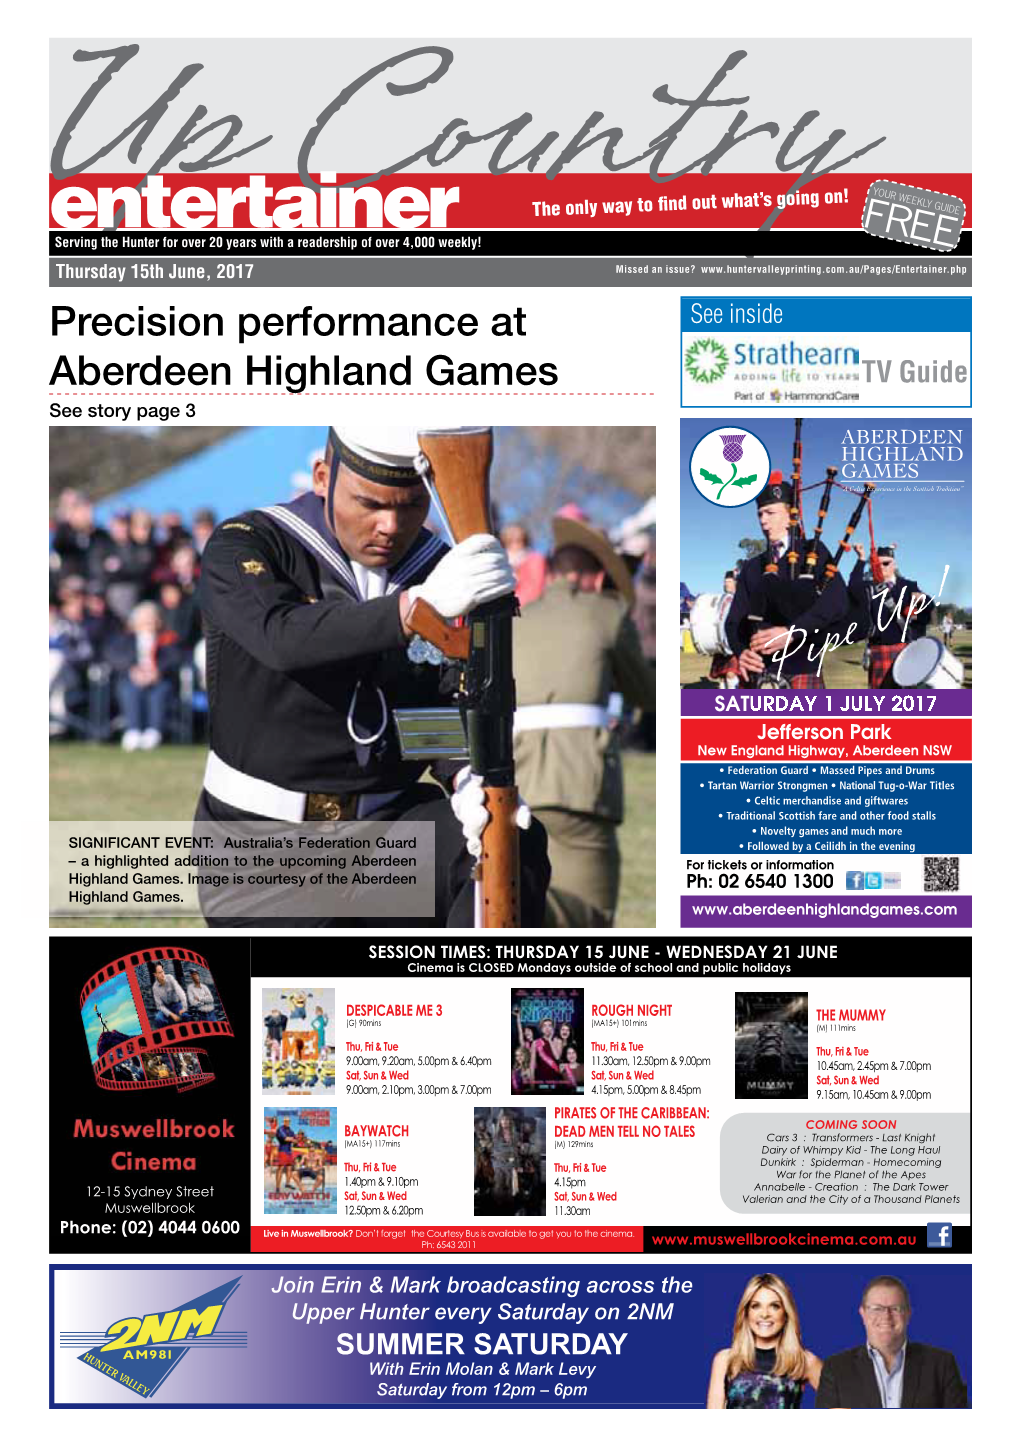 Precision Performance at Aberdeen Highland Games